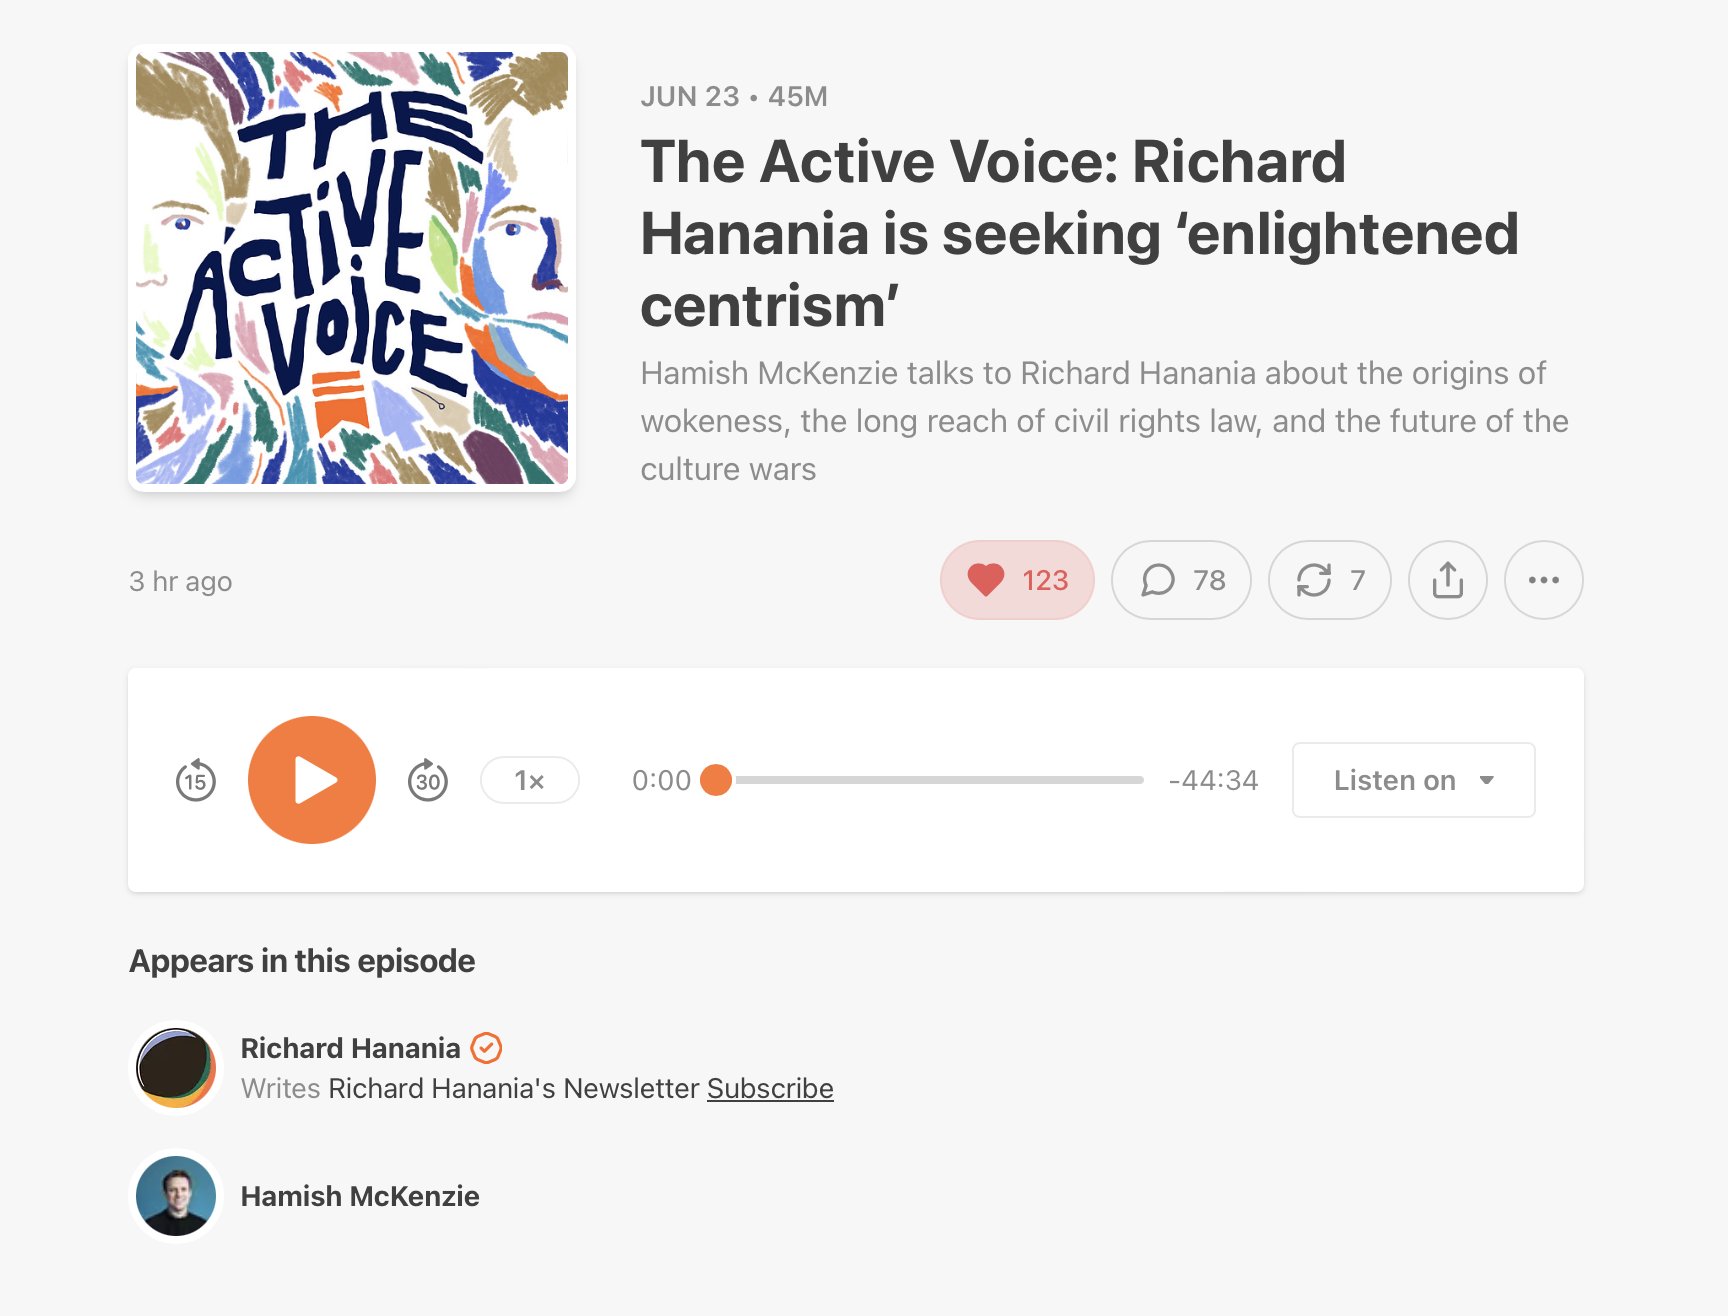 The Active Voice: Richard Hanania is seeking 'enlightened centrism